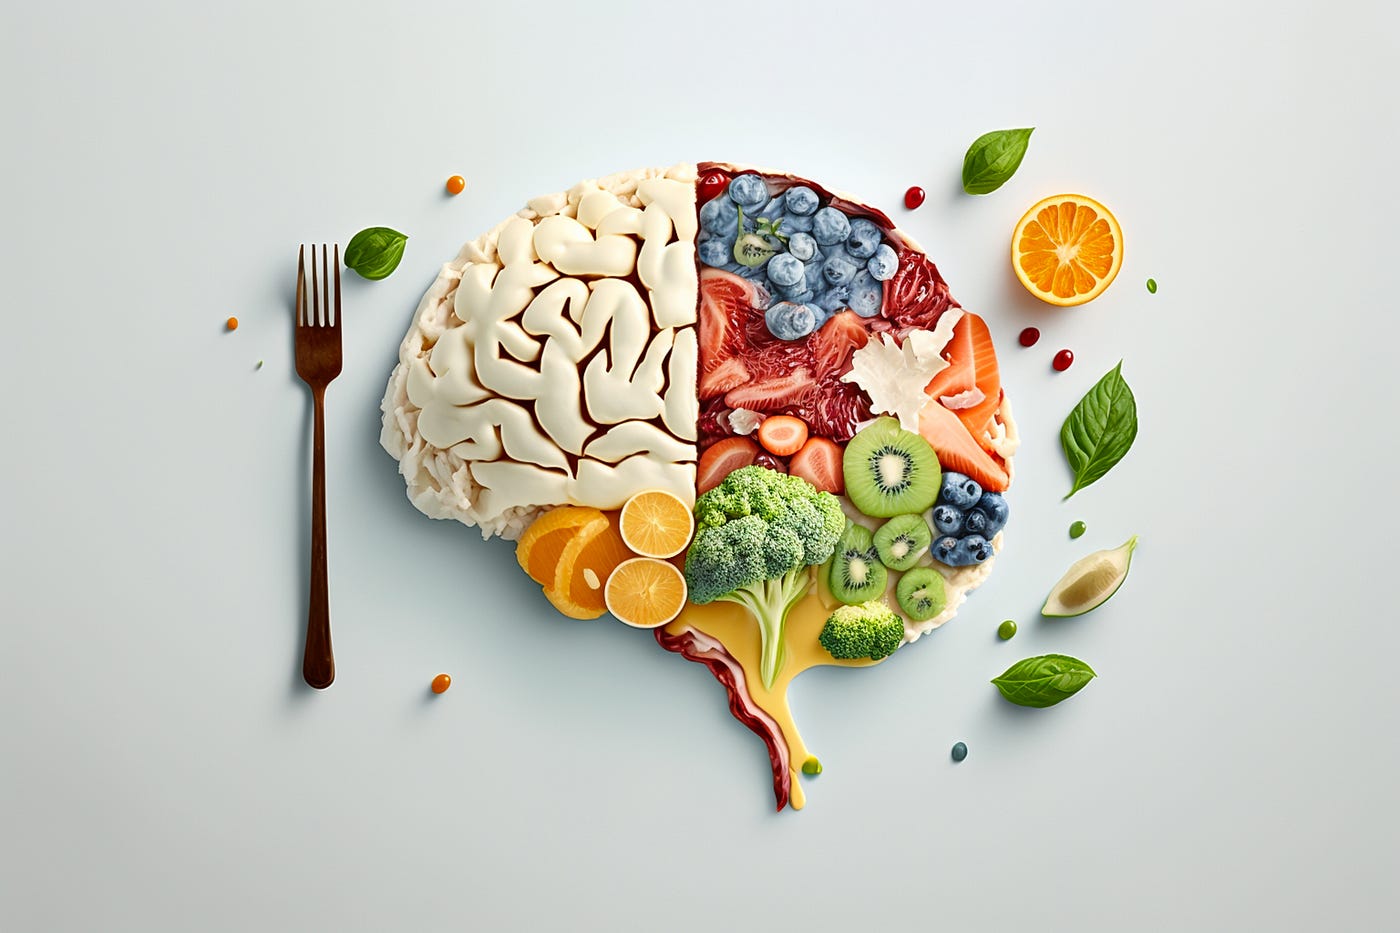 Proper nutrition plays a crucial role in mental health, supporting cognitive function and aiding in disease prevention.